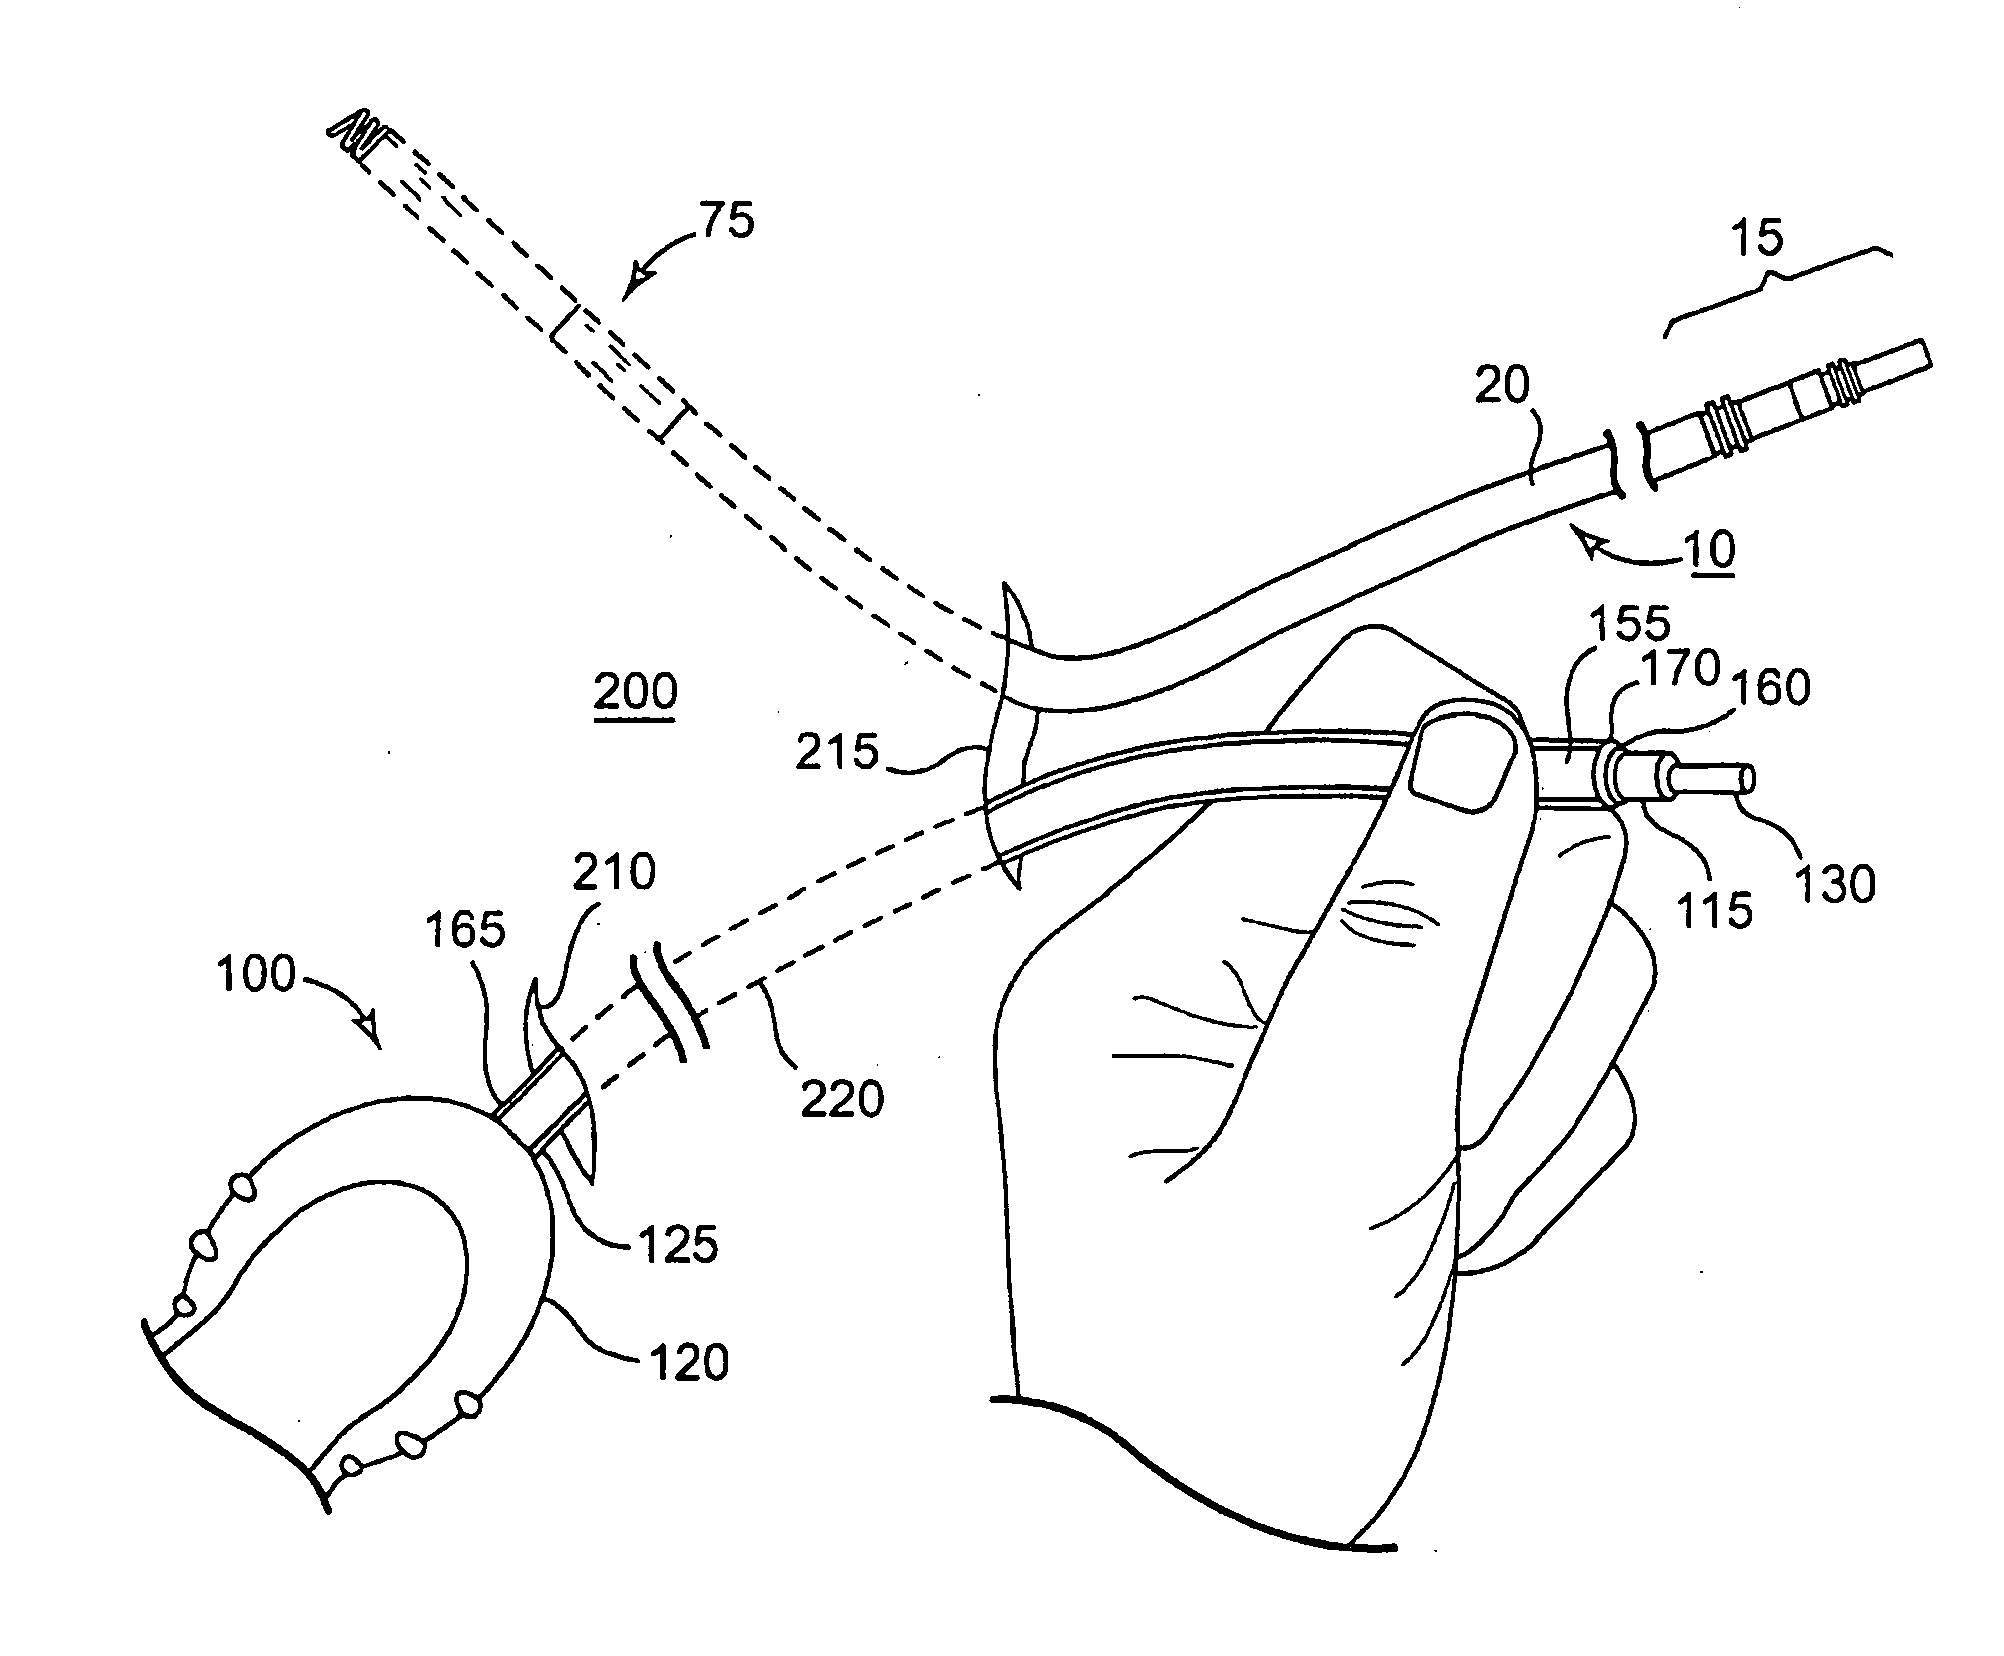 Systems and Methods for Implanting Medical Devices